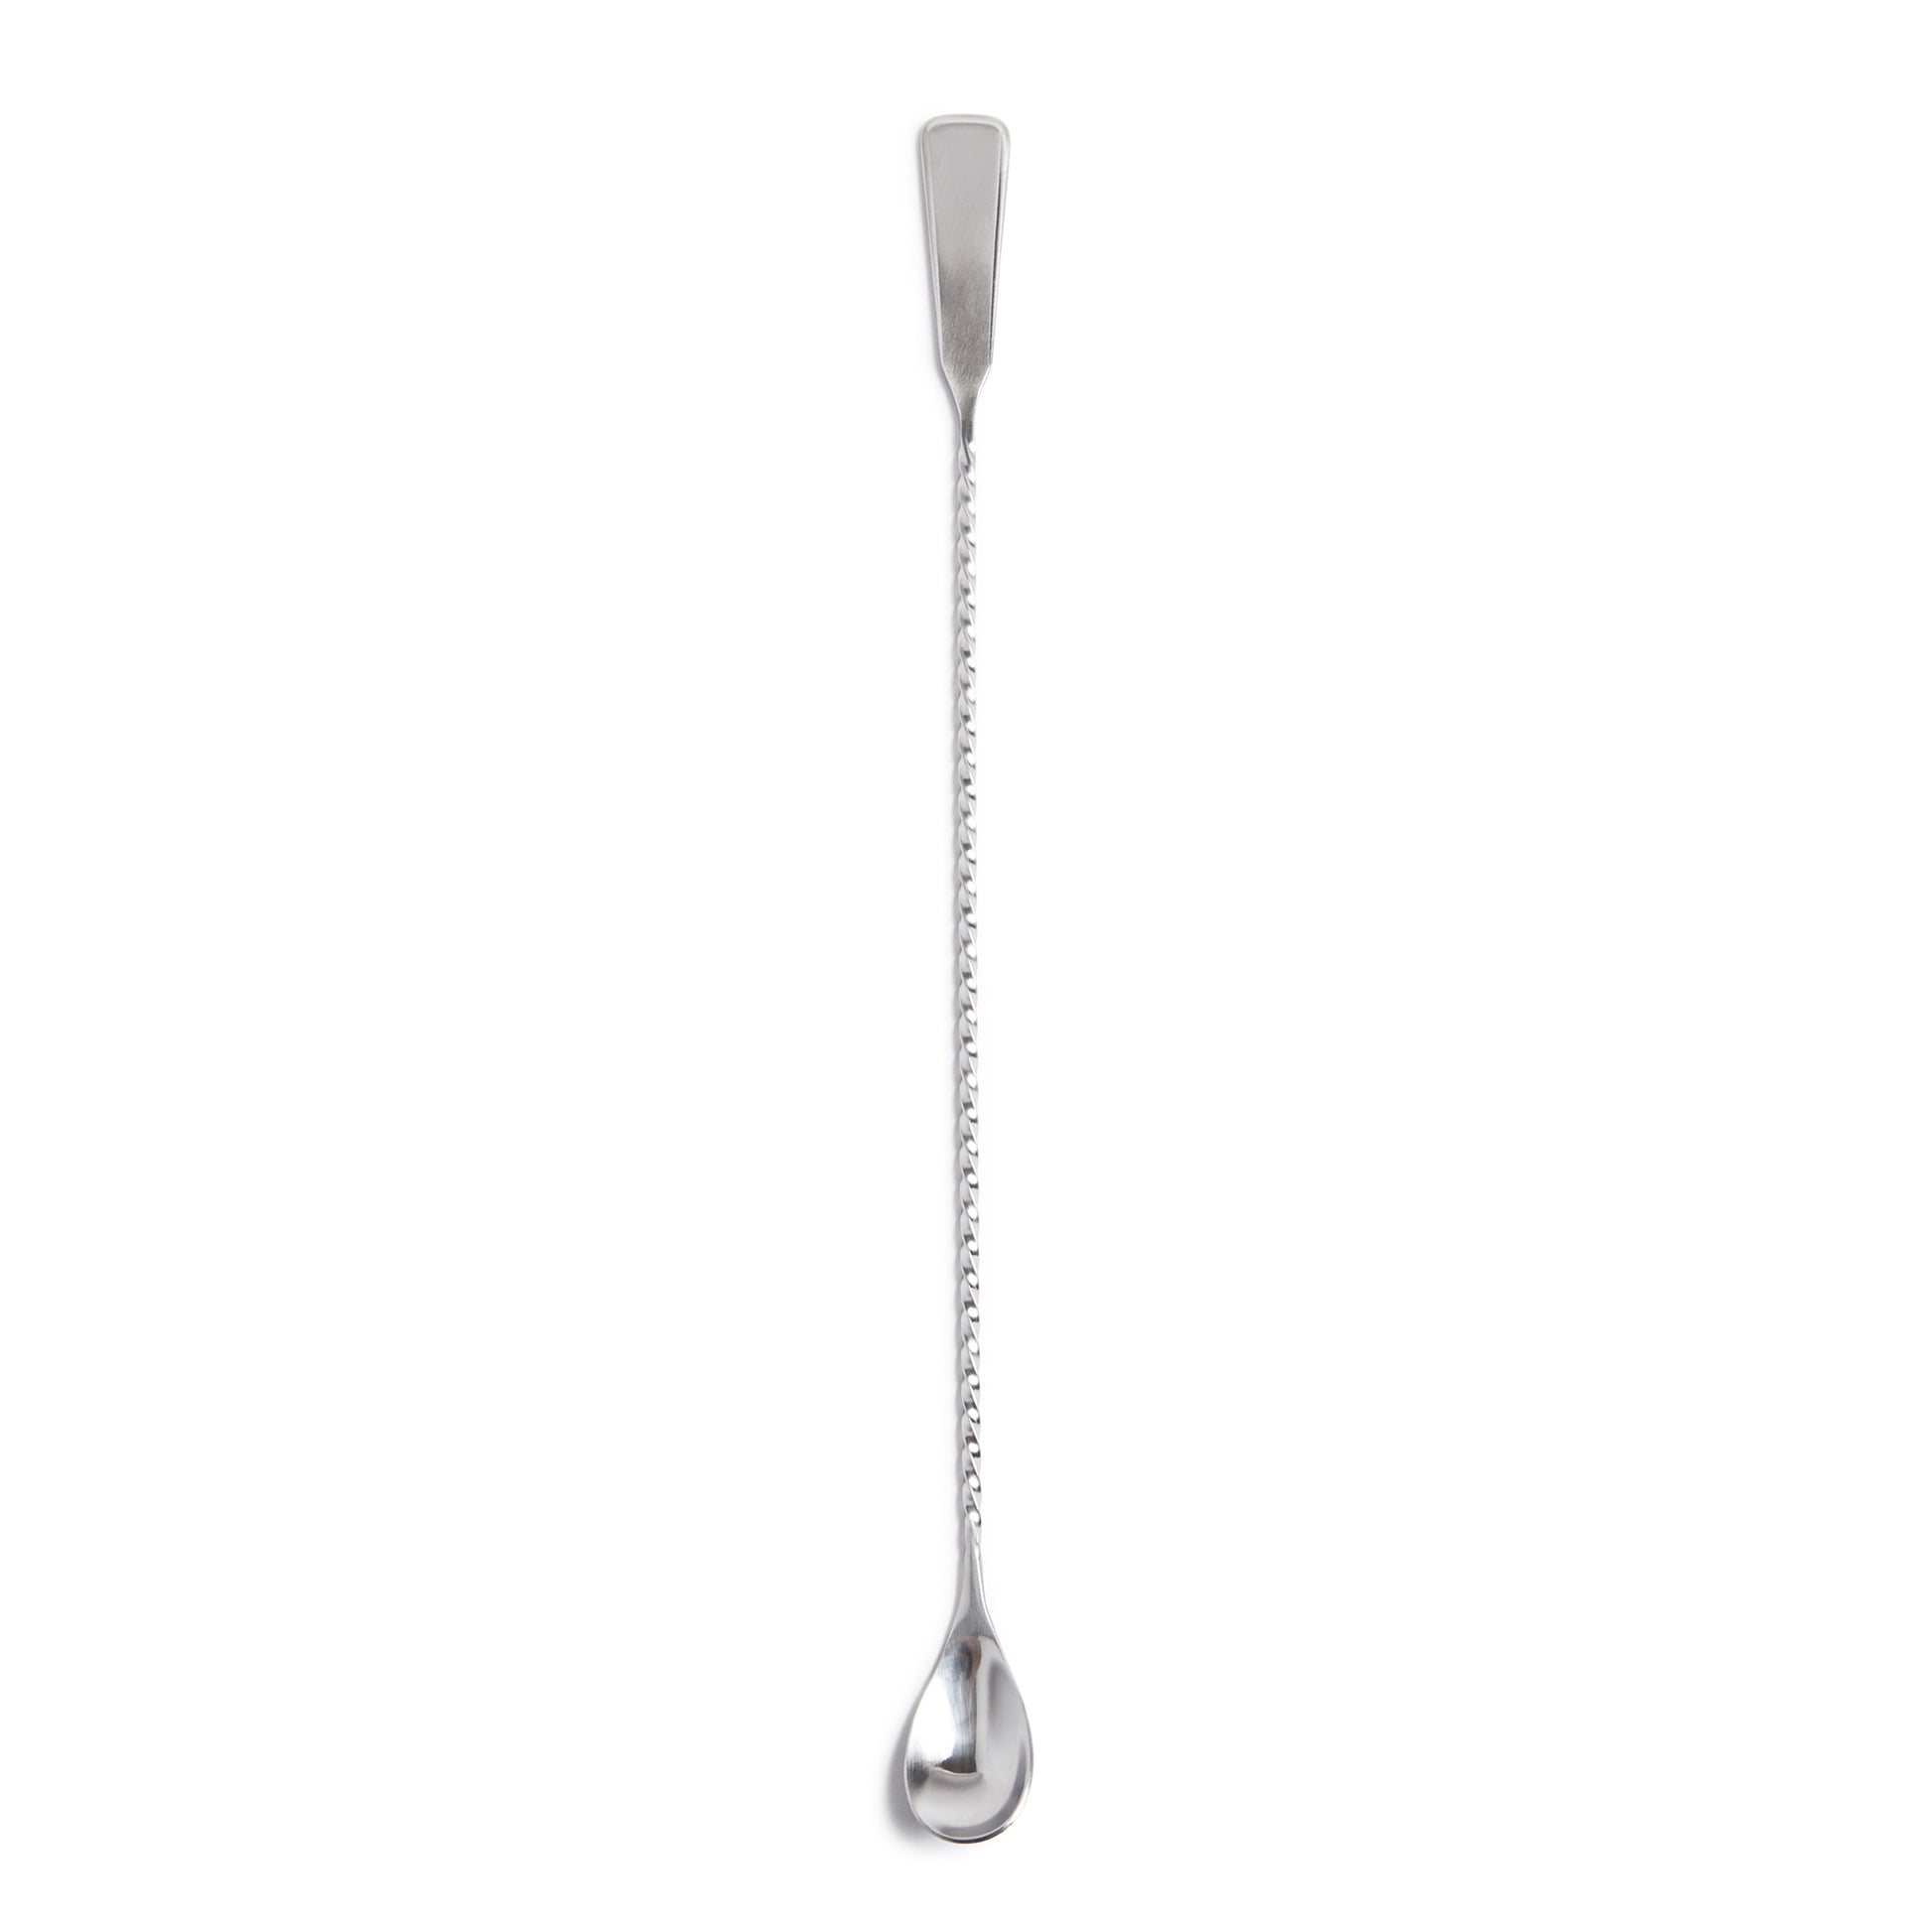 BROMLEY™ BARSPOON / STAINLESS STEEL / 36CM